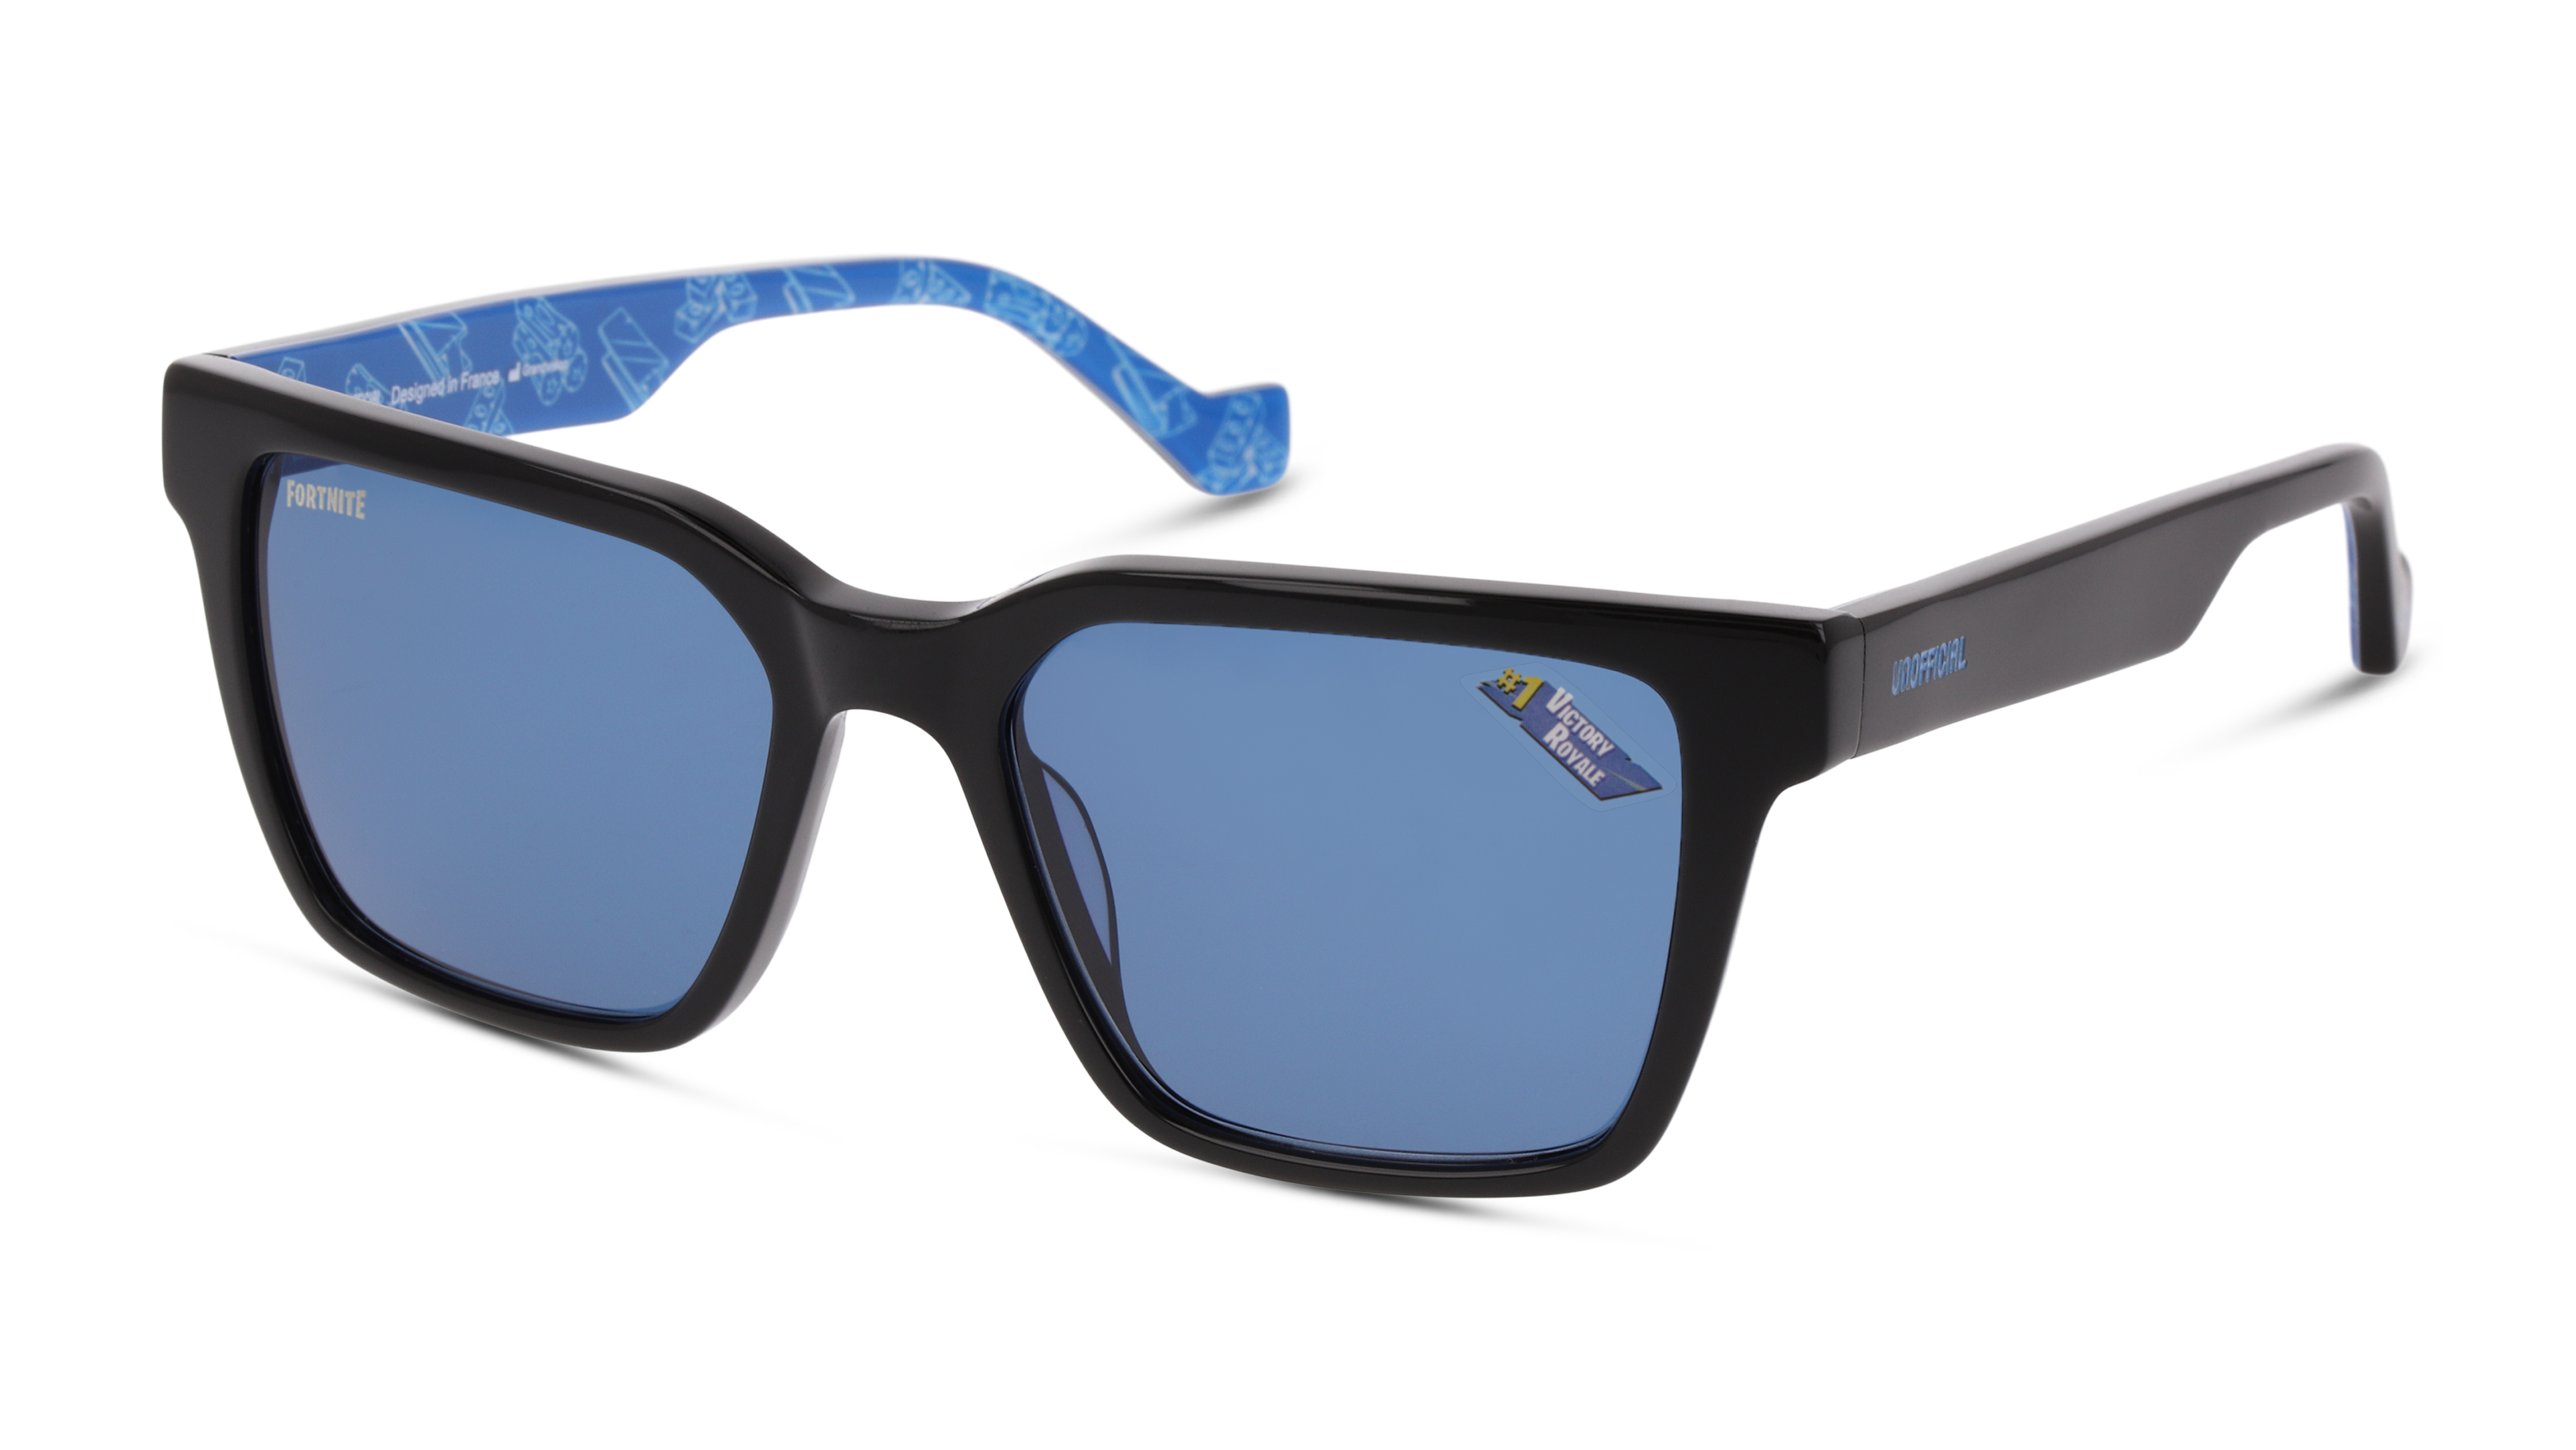 Angle_Left01 Fortnite with Unofficial UNSU0128 (BXL0) Sunglasses Blue / Black